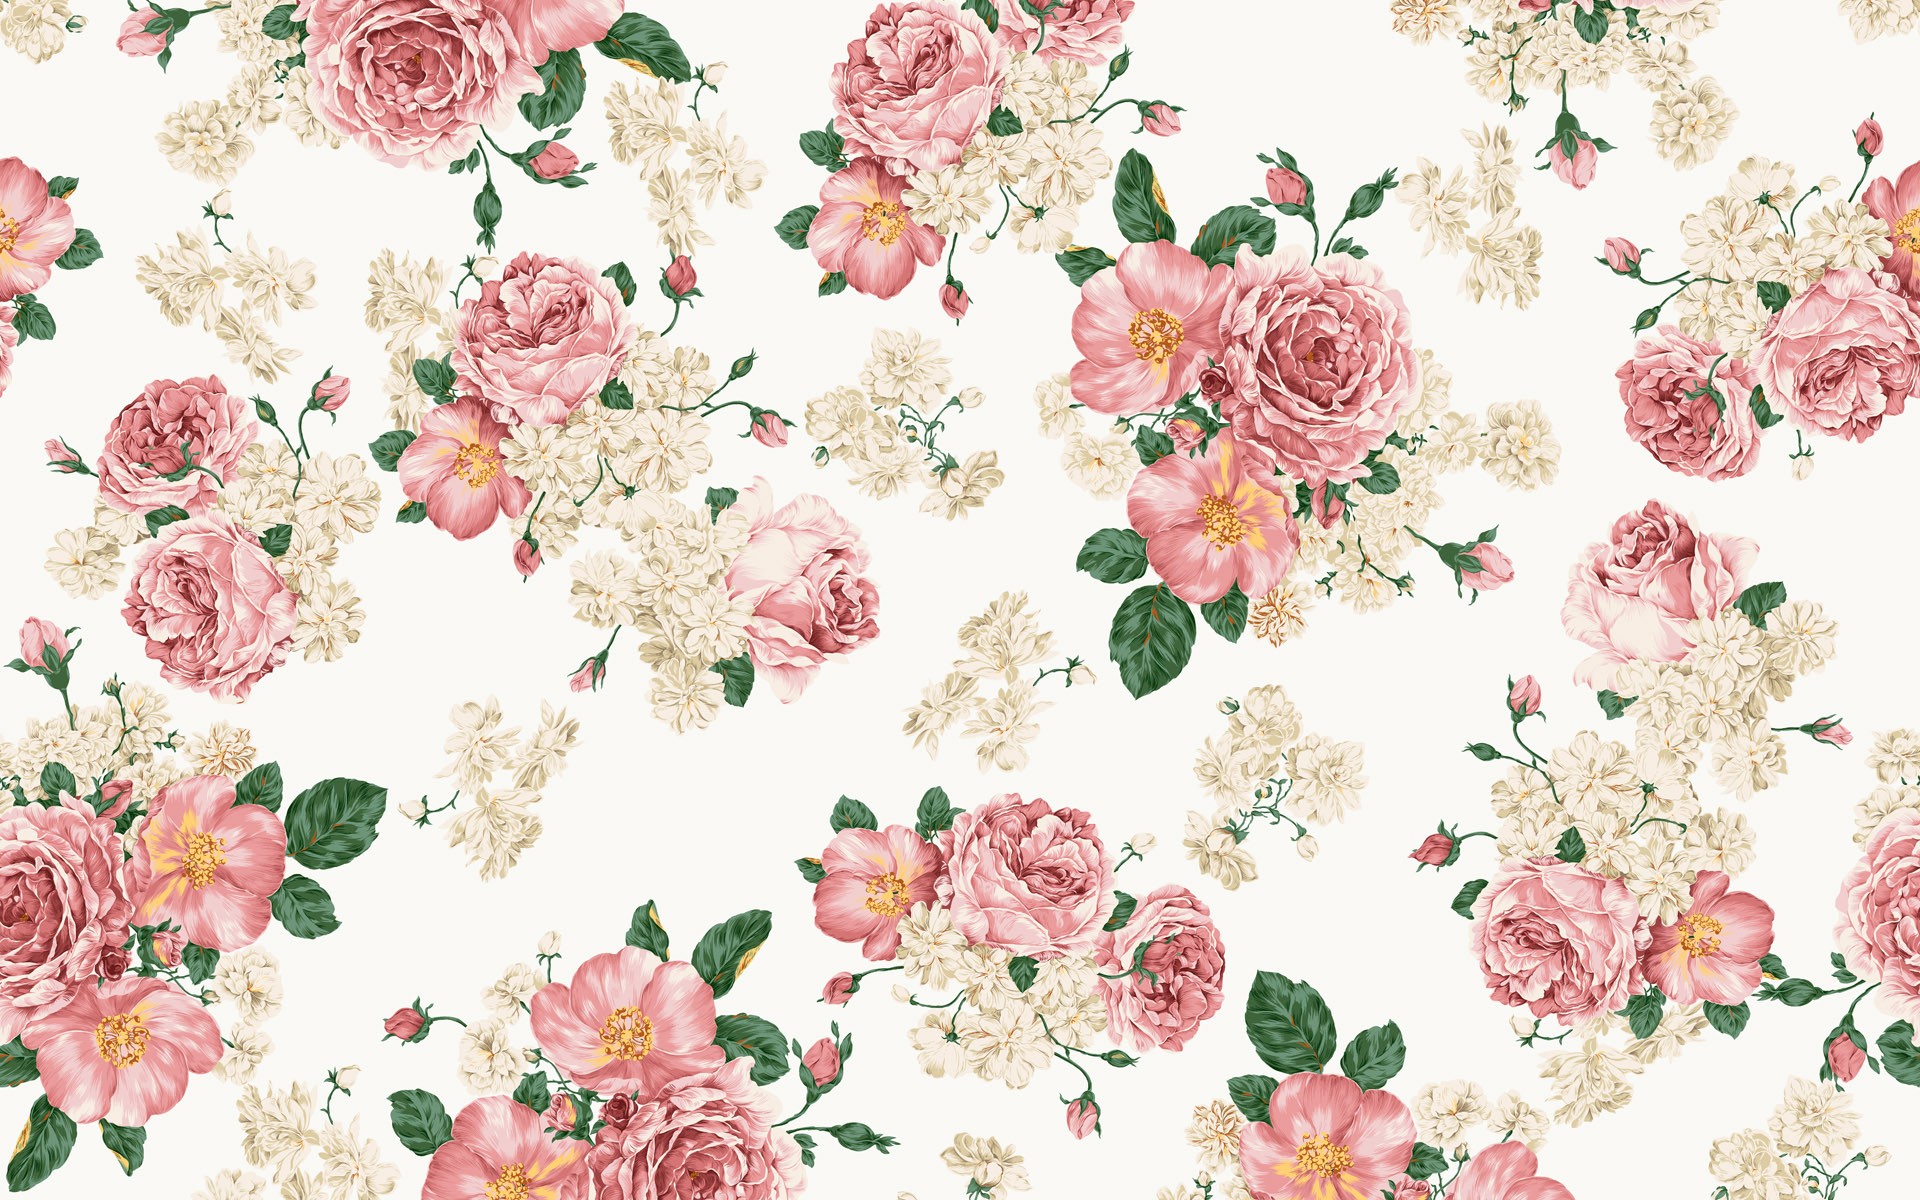 Rose Backgrounds Tumblr